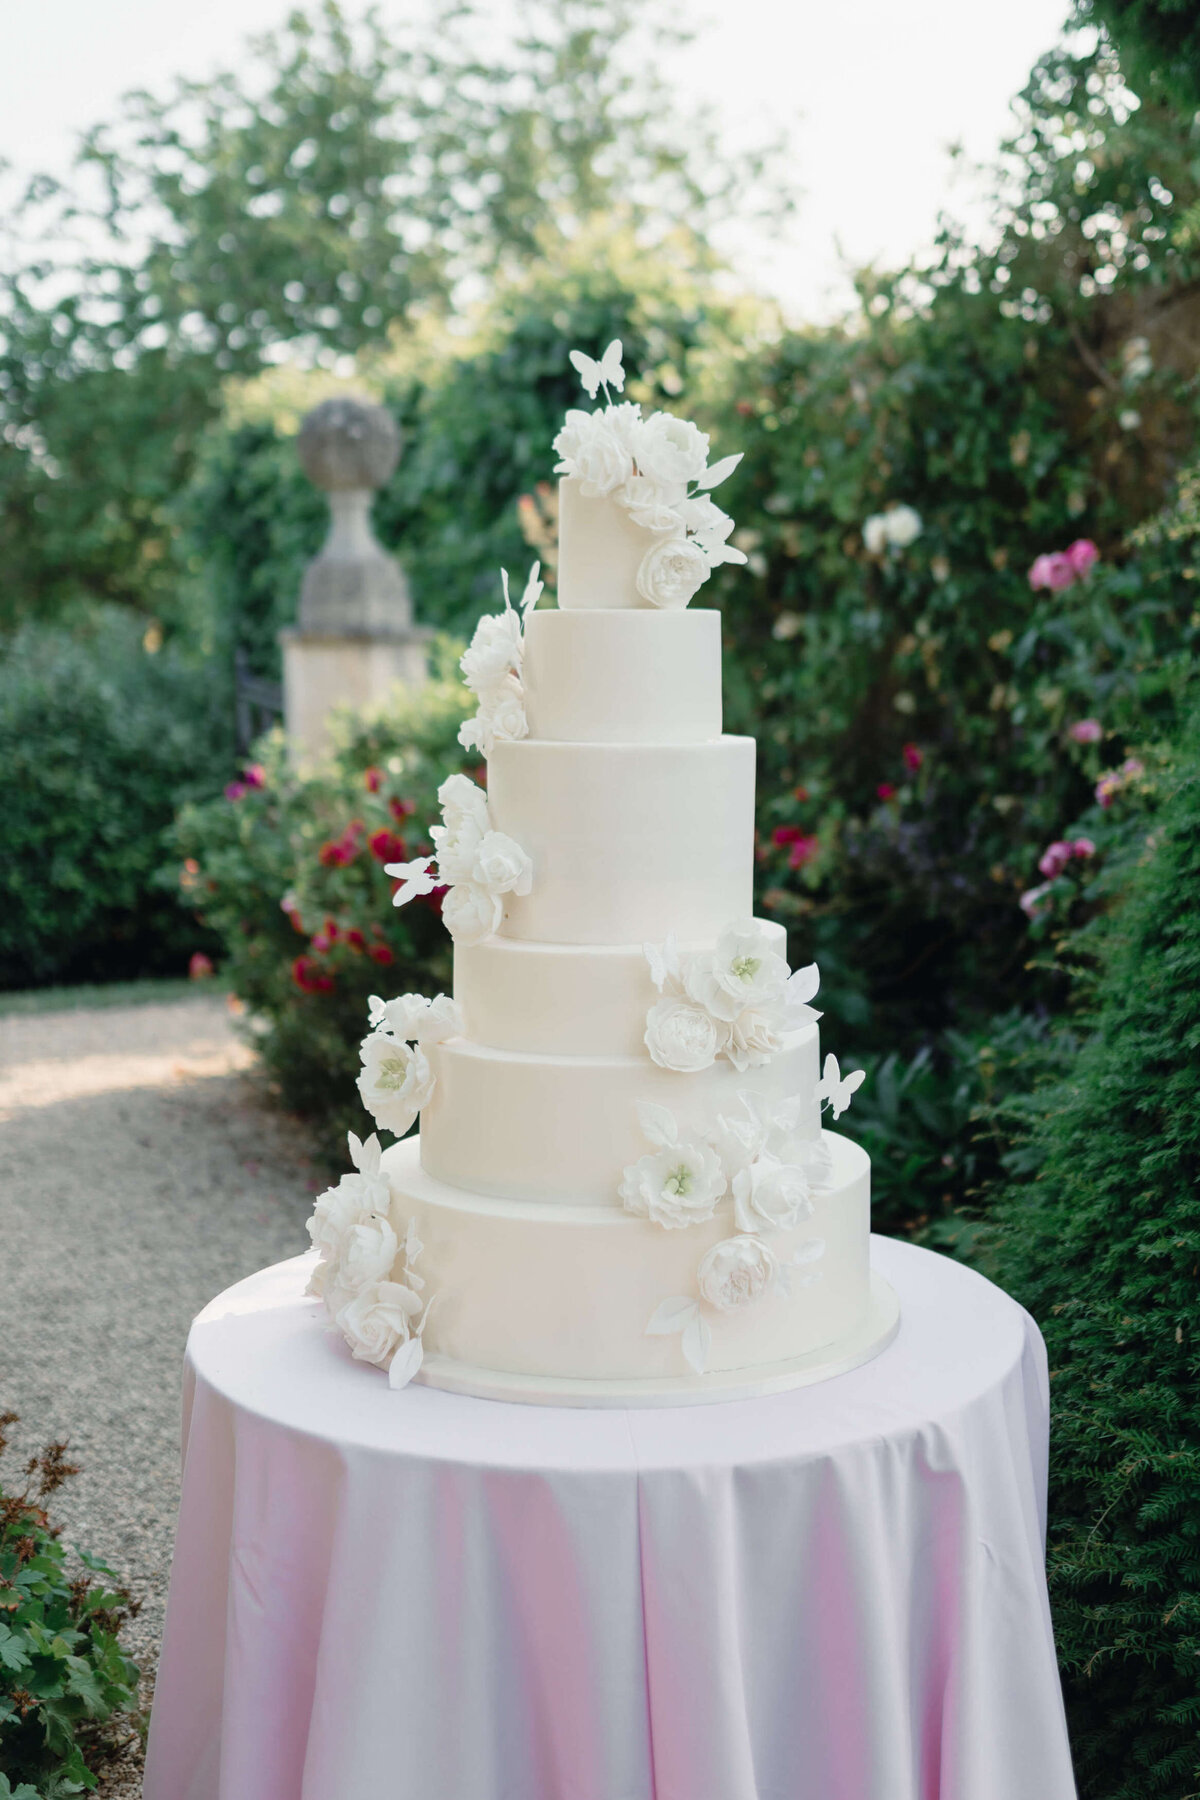 romantic six tier white wedding cake decorated with sugar flowers and butterflies sat on pink table linen in the gardens of euridge manor